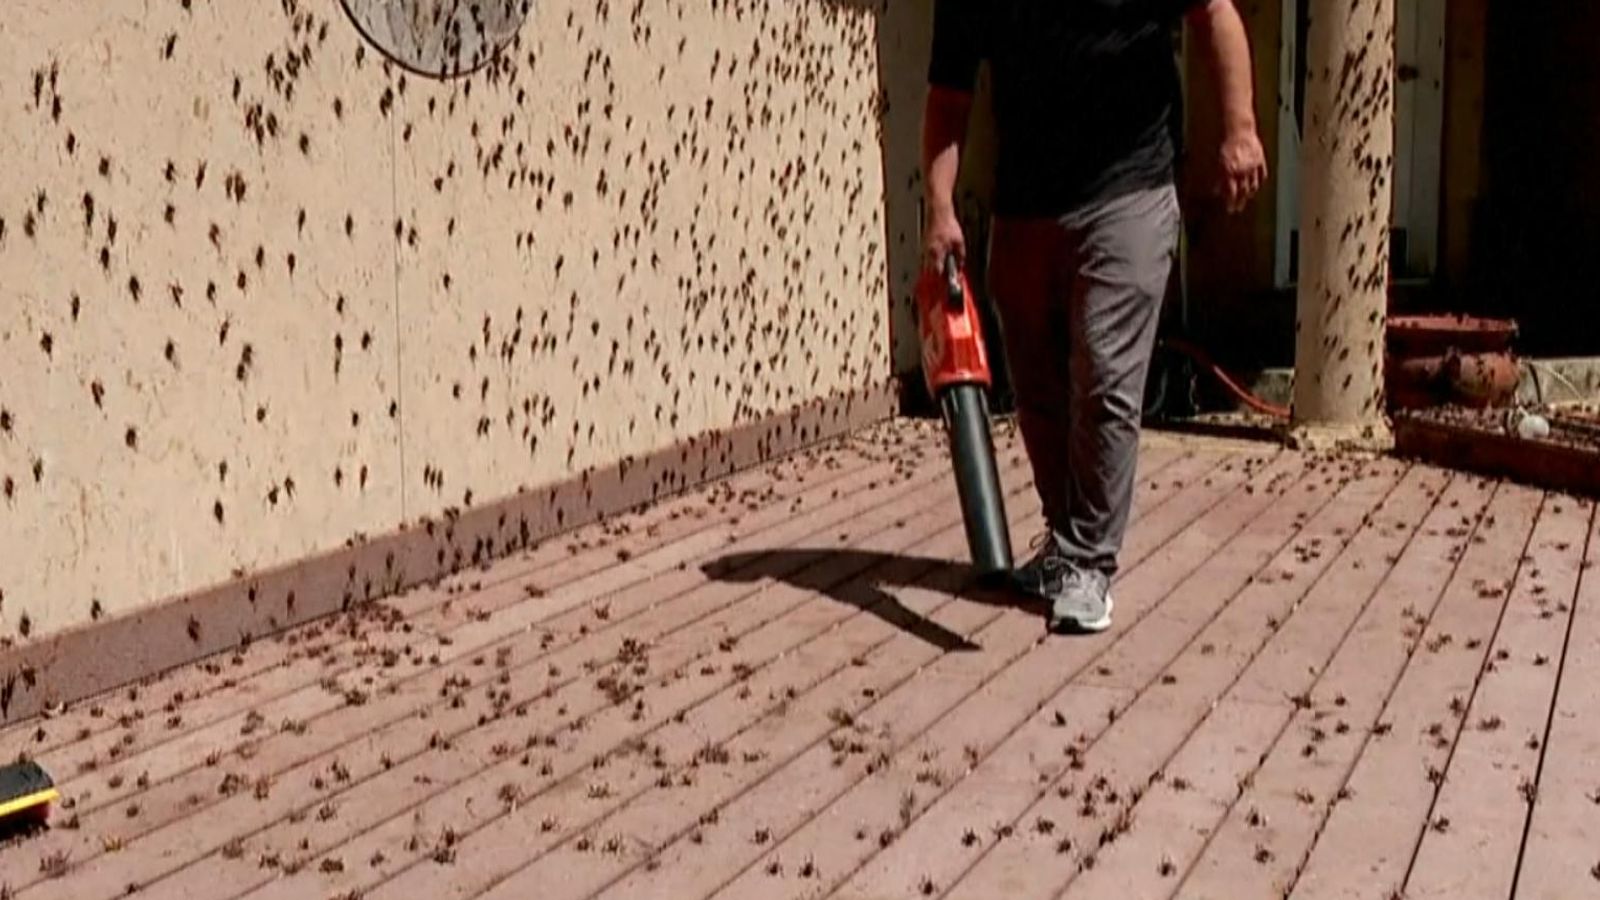 City in Nevada is hit by 'plague' of crickets US News Sky News